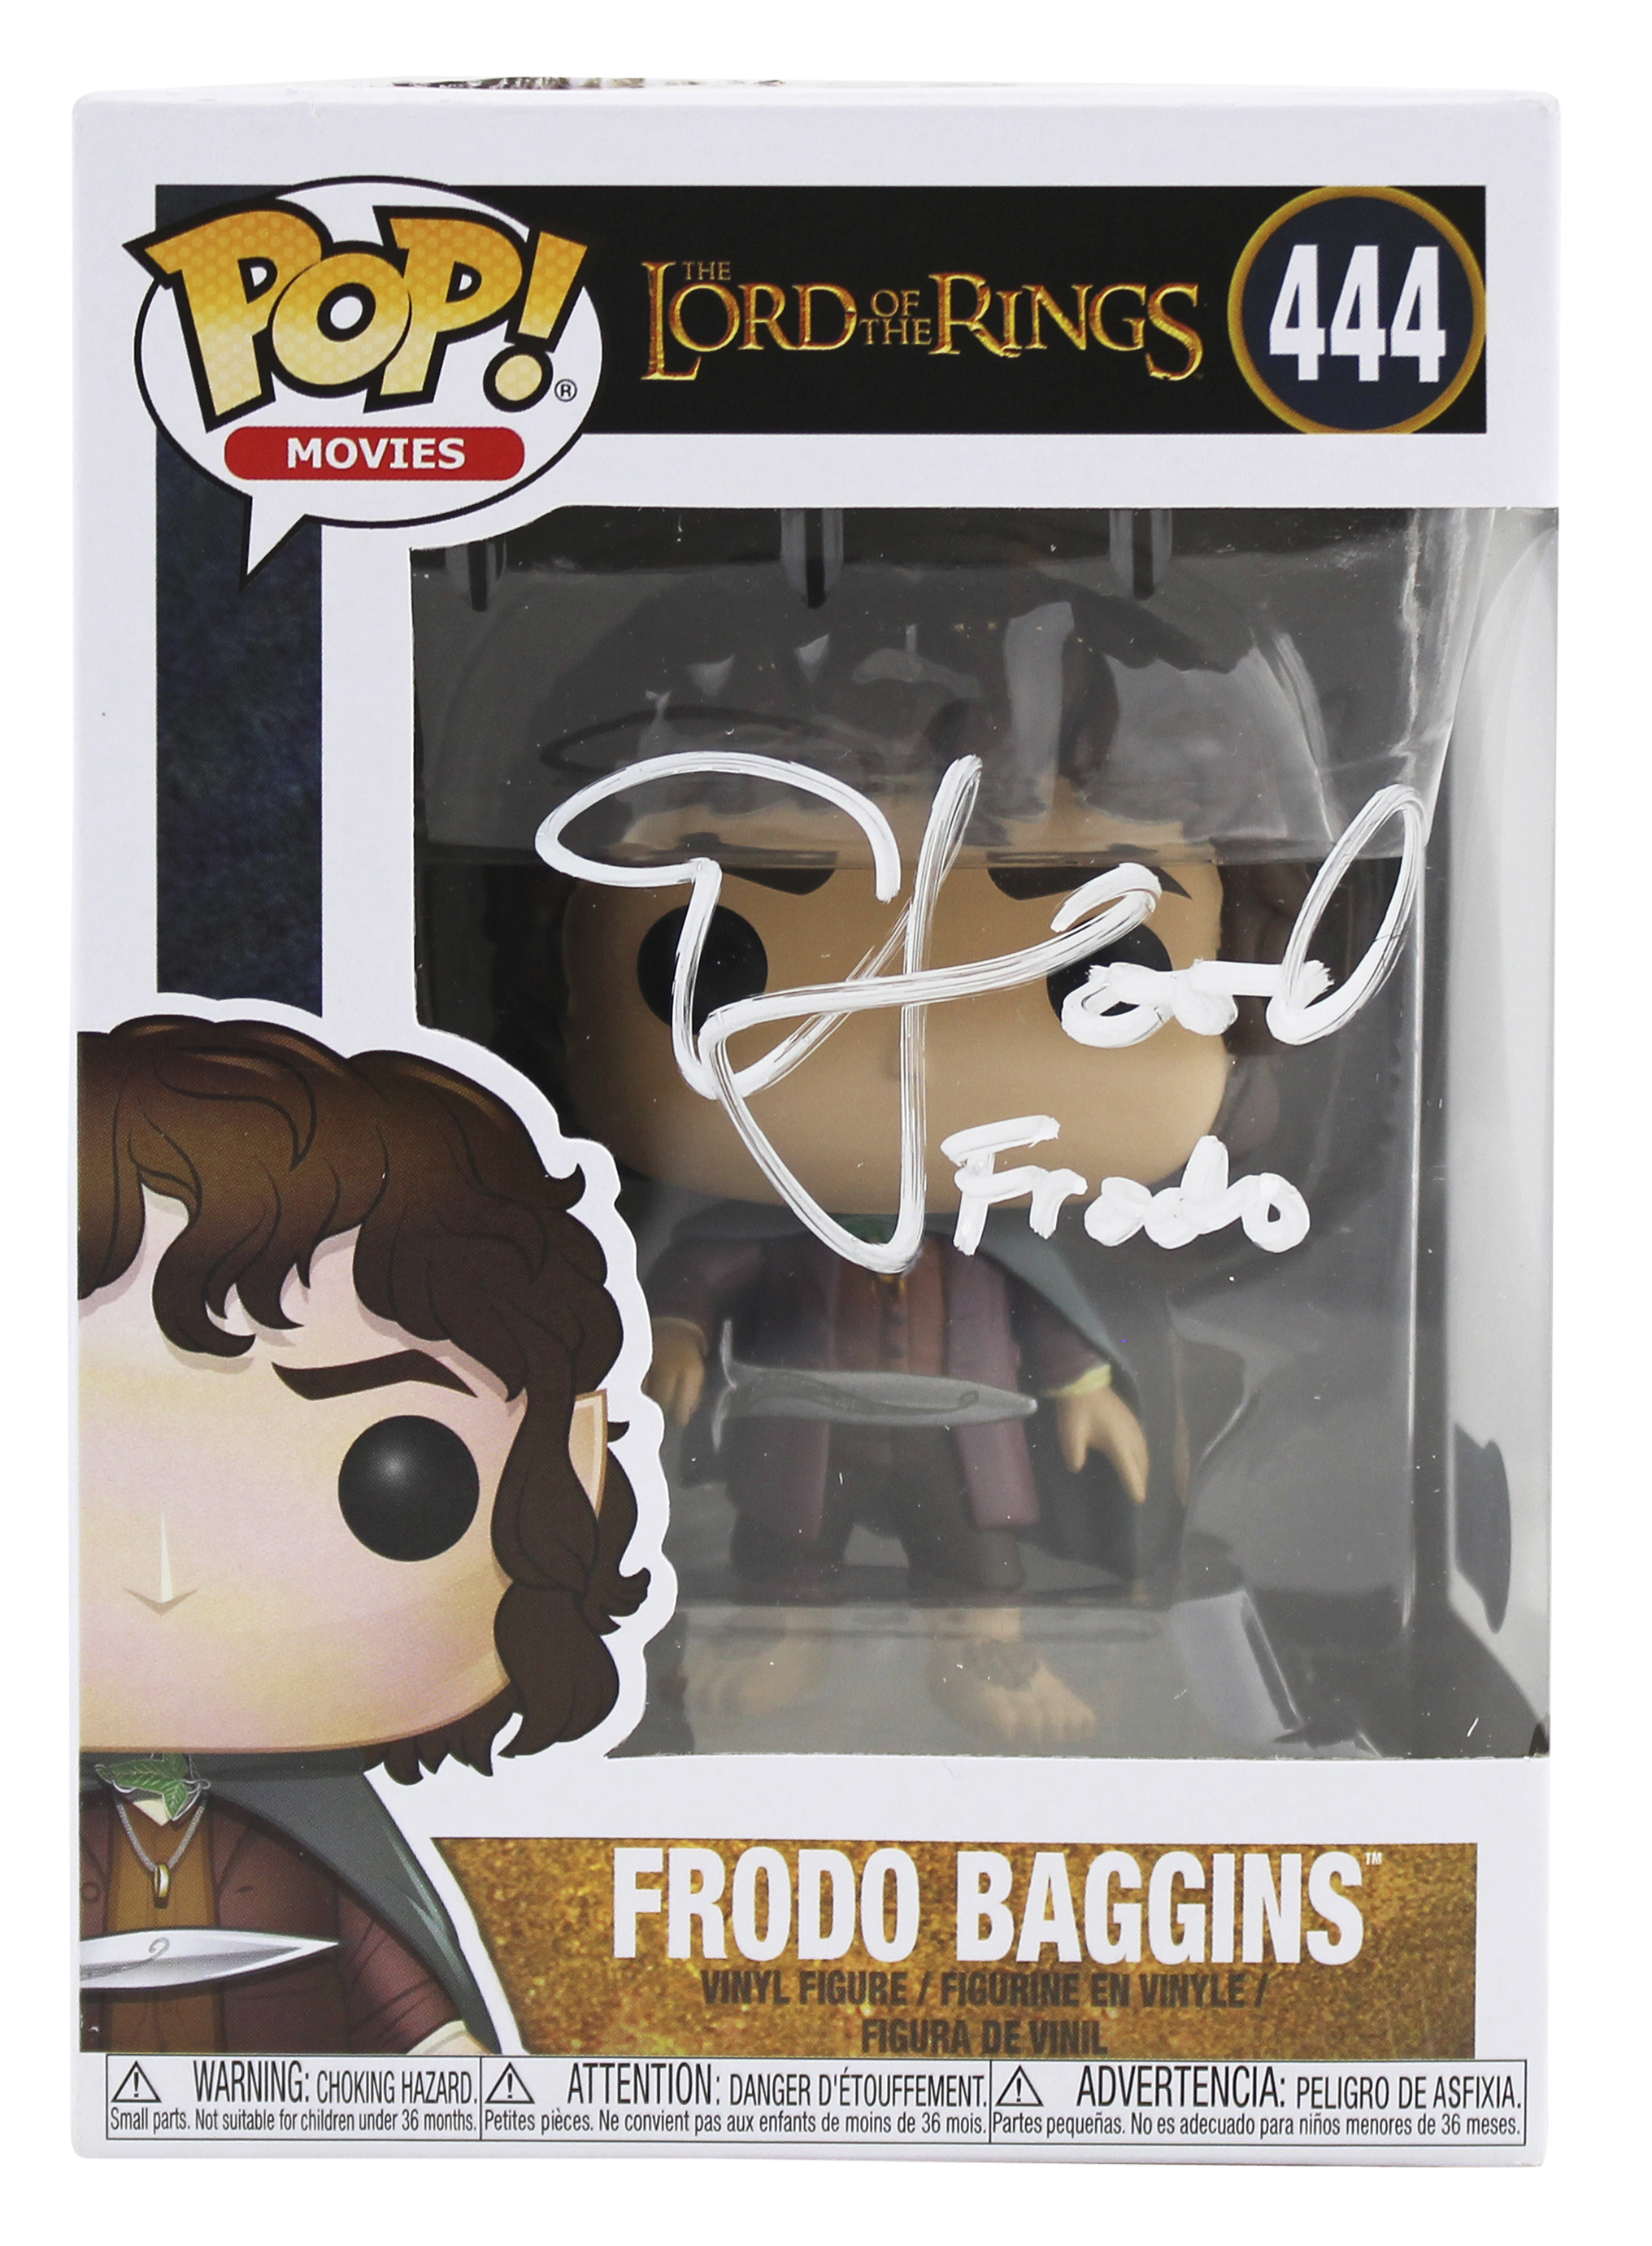 Press Pass Collectibles Elijah Wood Lord of the Rings "Frodo" Signed Funko Pop Vinyl Figure BAS #W774971